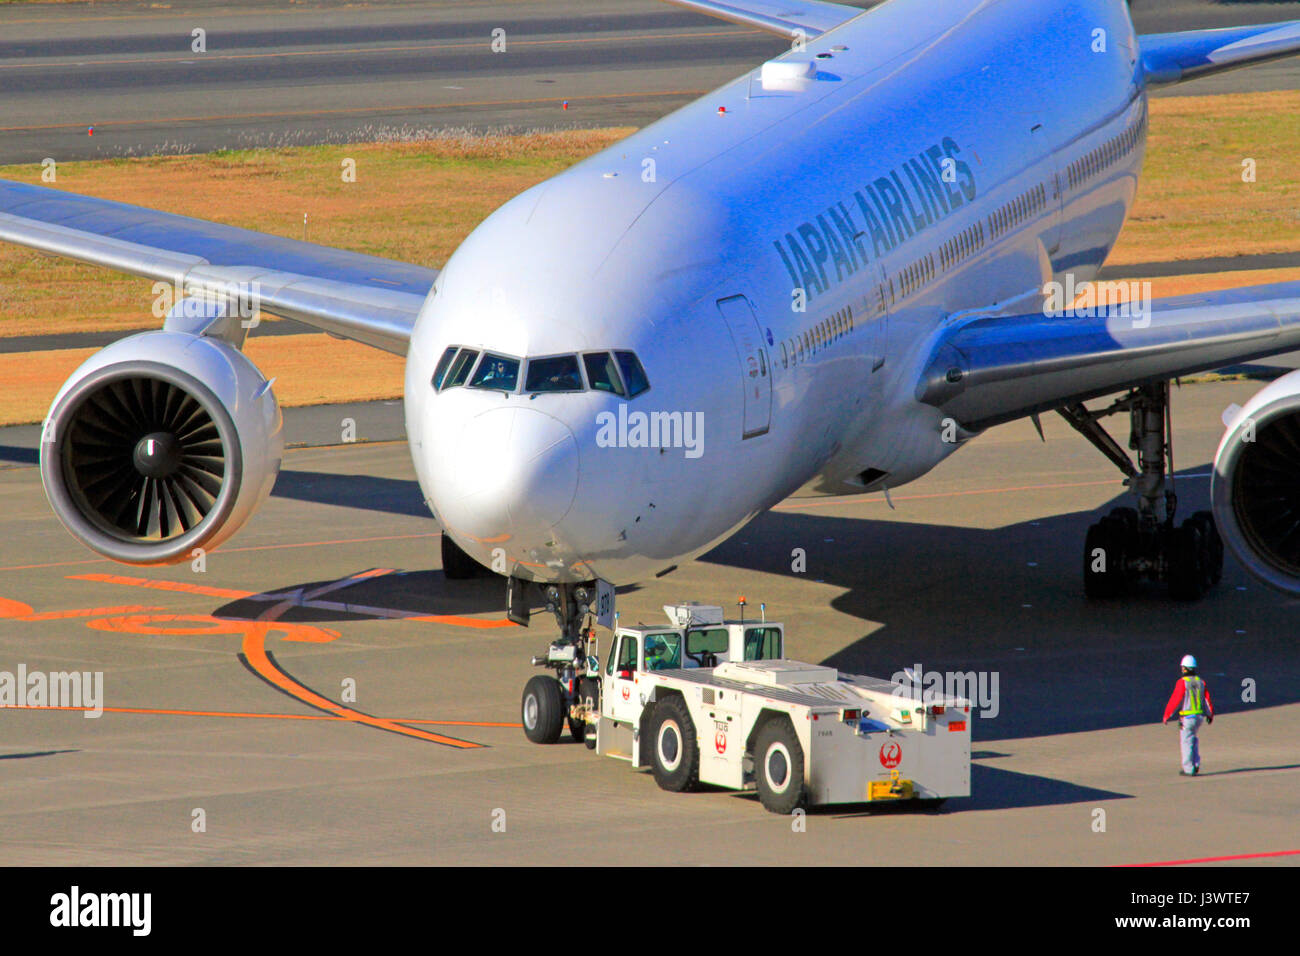 JAL Boeing 777 Pushed by Towing Car at Haneda Airport Tokyo Japan Stock Photo